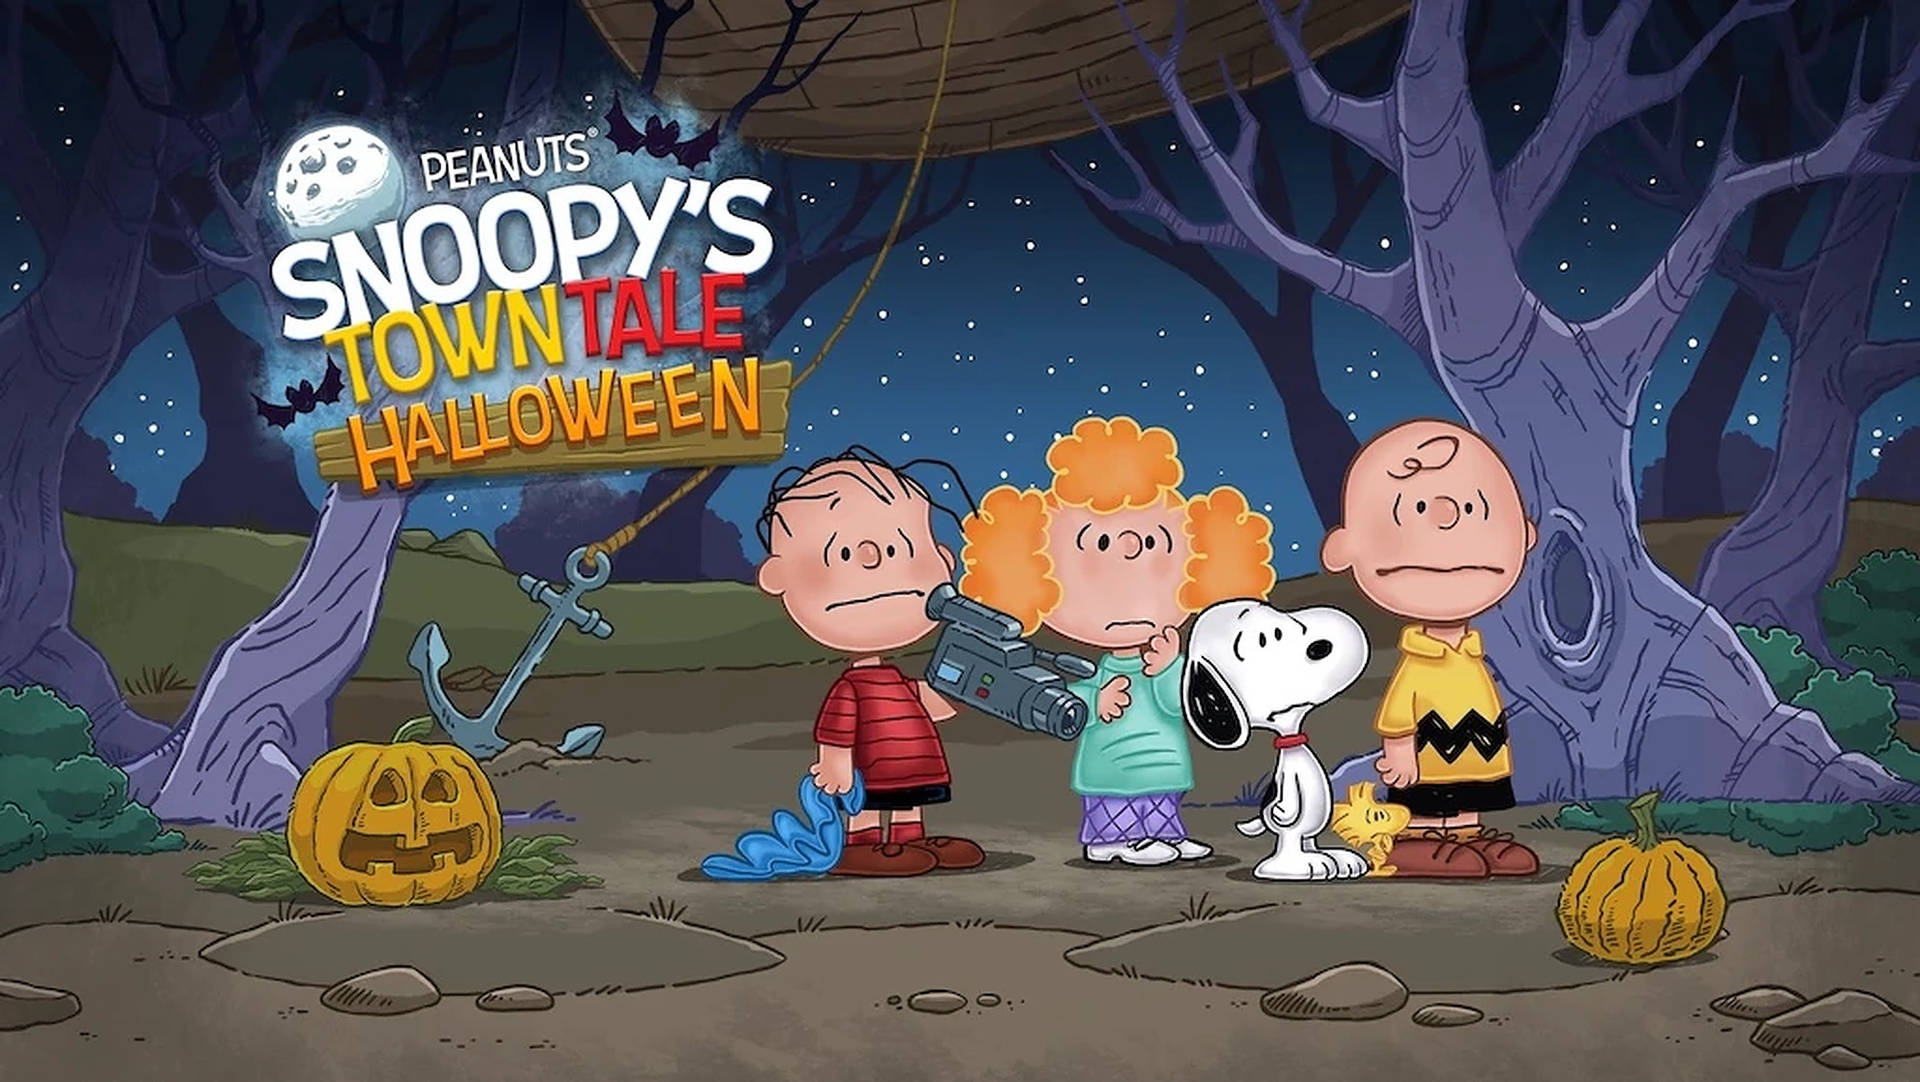 Charlie Brown Towntale Halloween Background